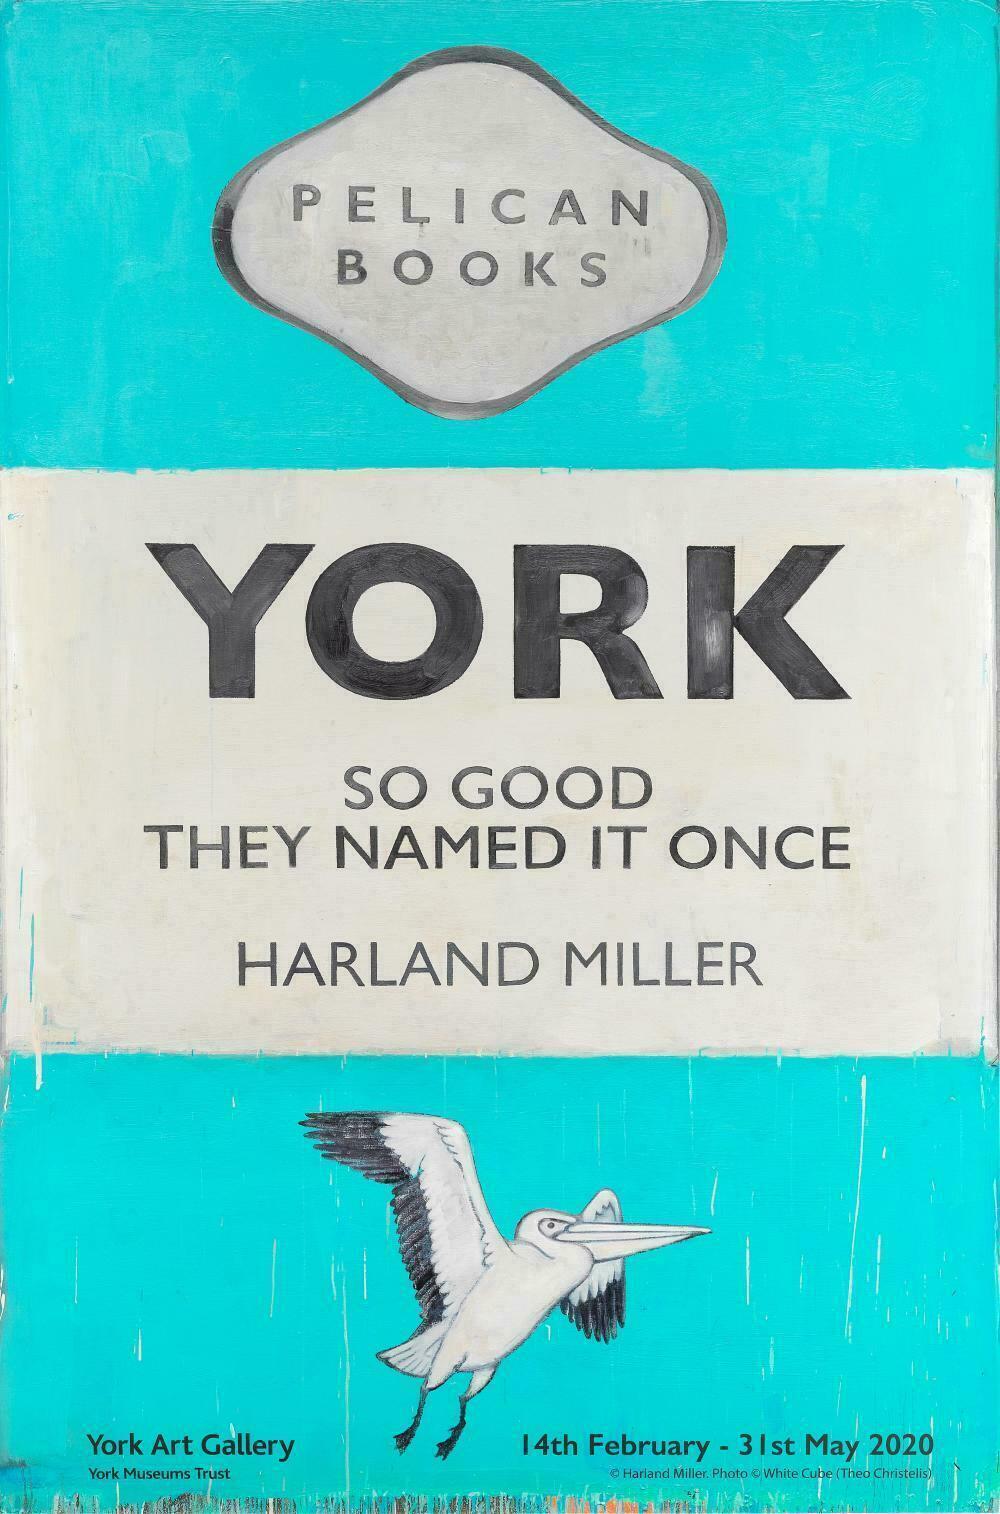 Pelican Books York "So Good they named it once" Exhibition Poster on Fine Paper - Art by Harland Miller